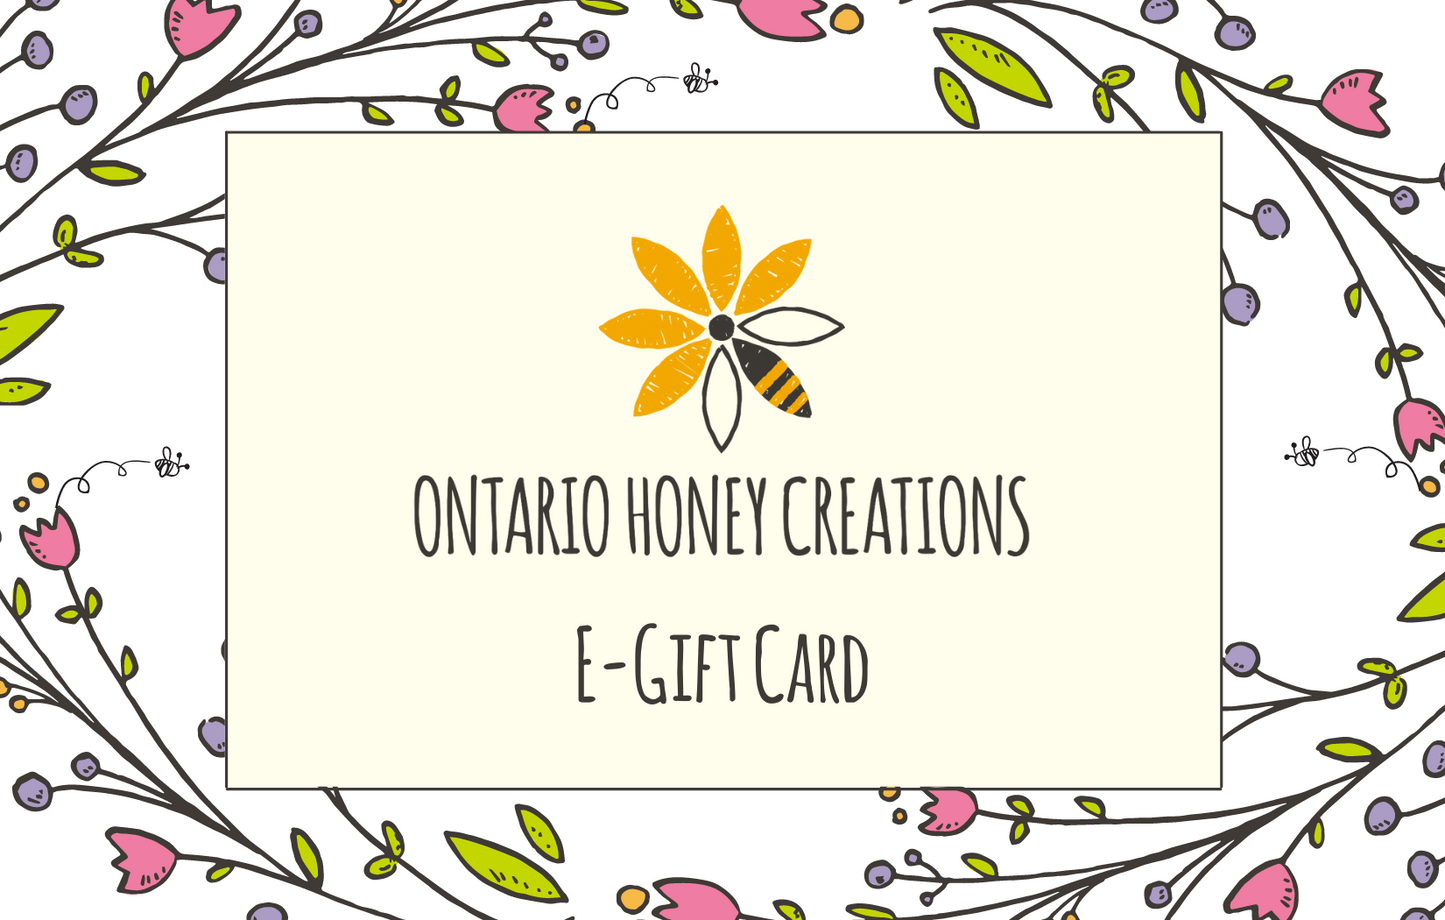 Image of Ontario Honey Creations E-gift card with drawings of purple and pink flowers in the background. 